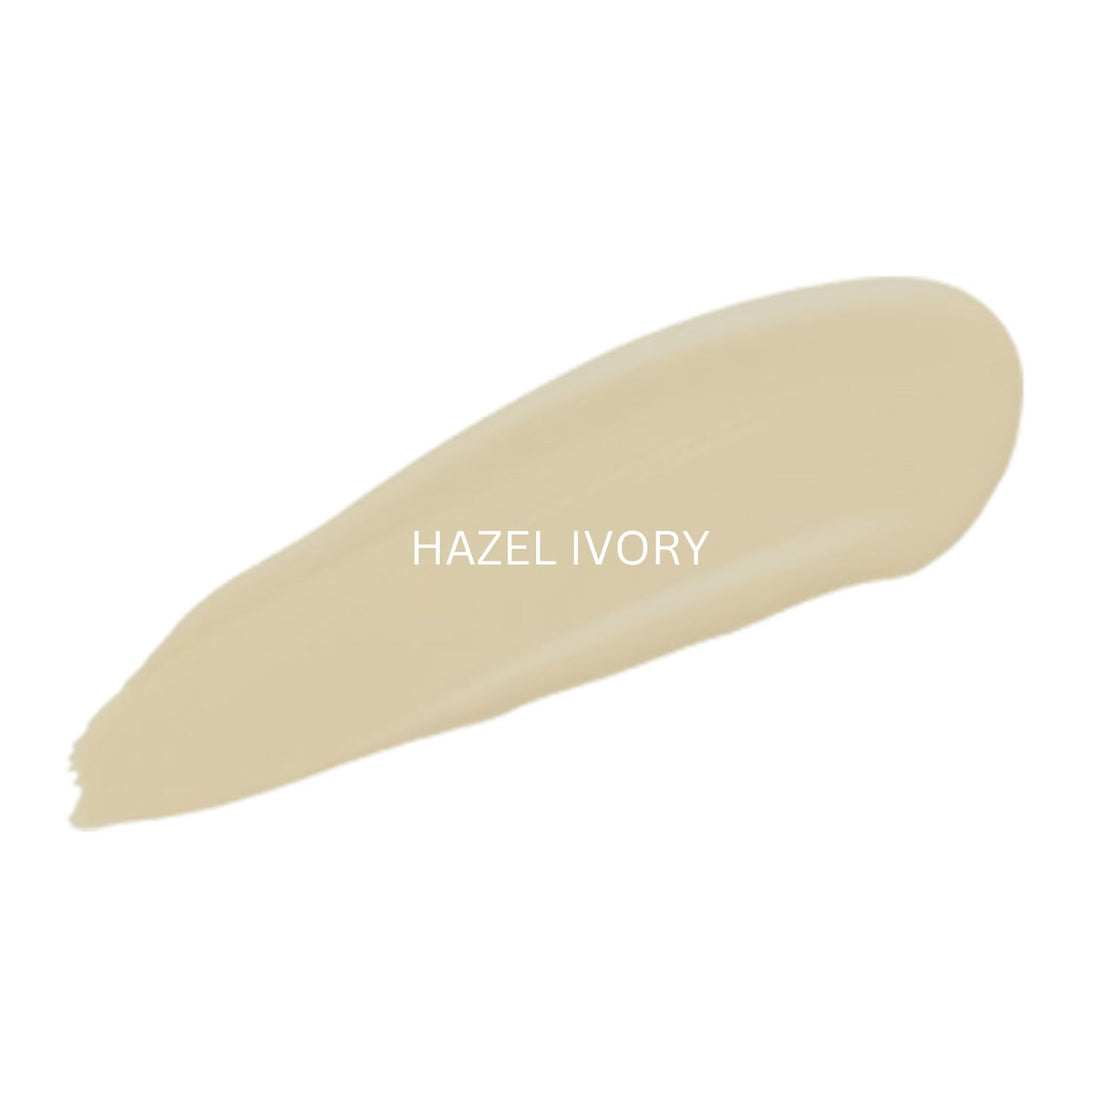 Paul Penders Hand Made Moisture Cream Foundation For A Natural Cover - Hazel Ivory 30g